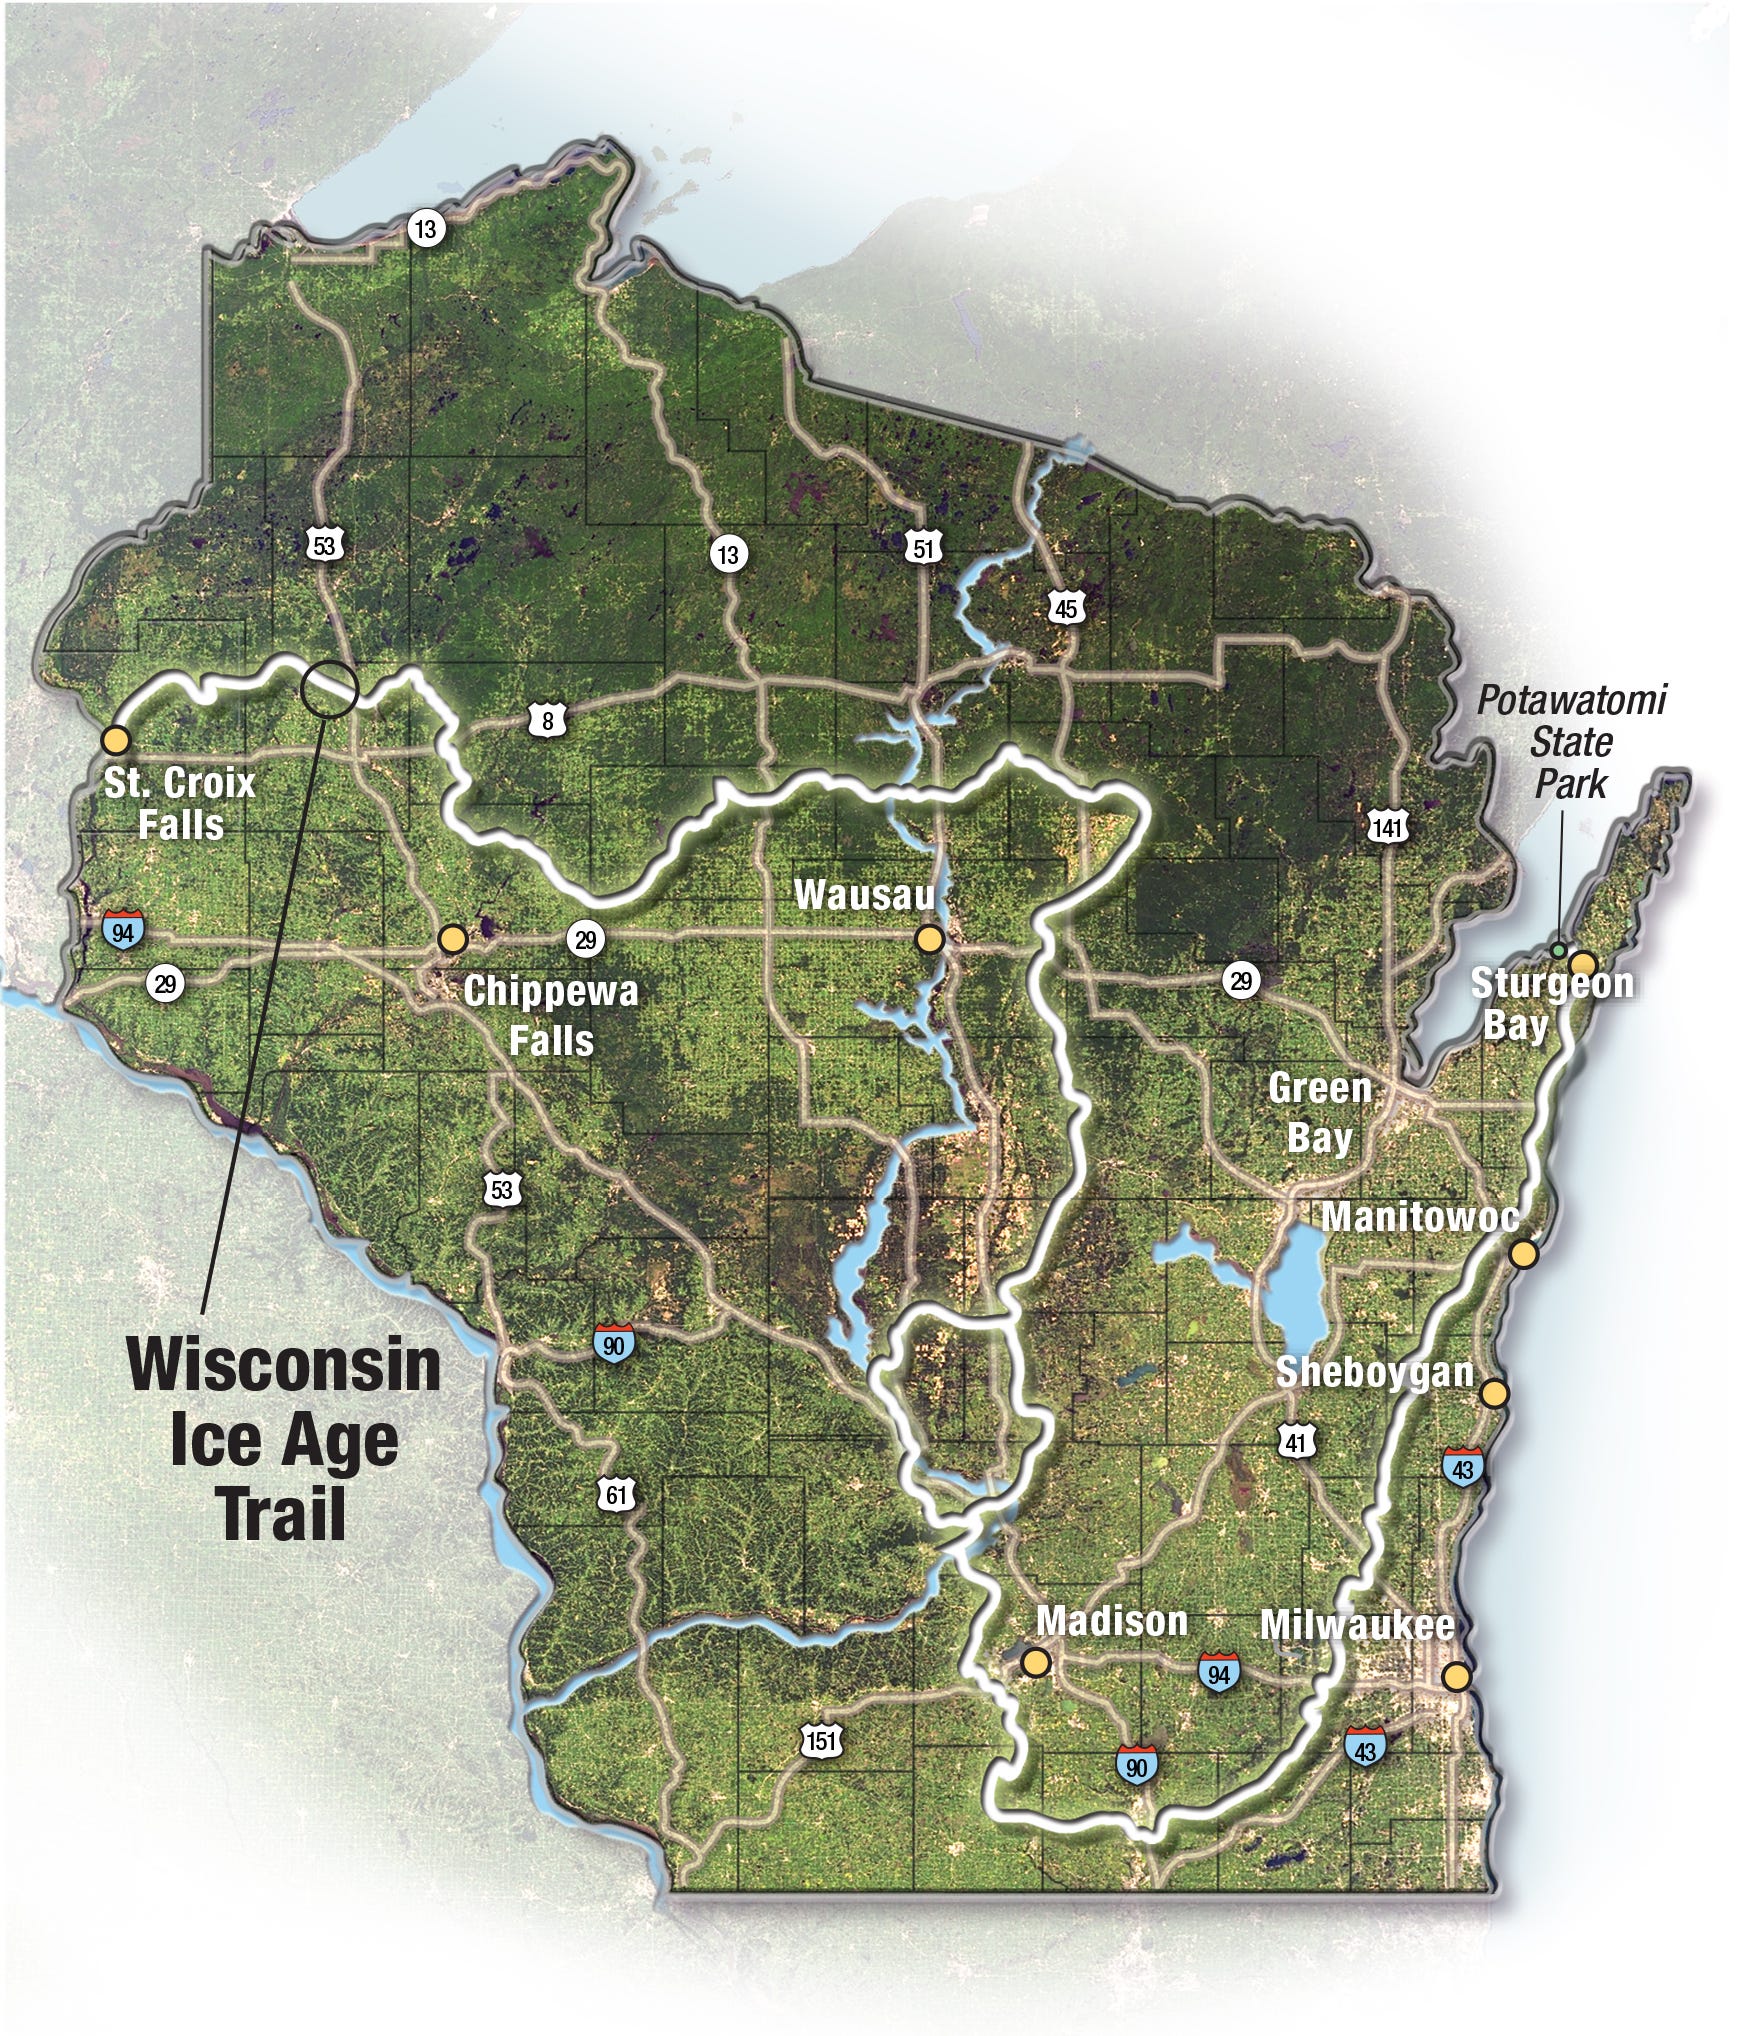 NATIONAL SCENIC TRAIL ICE AGE TREE WISCONSIN NATURAL CURVE w/NAILS SIGN 